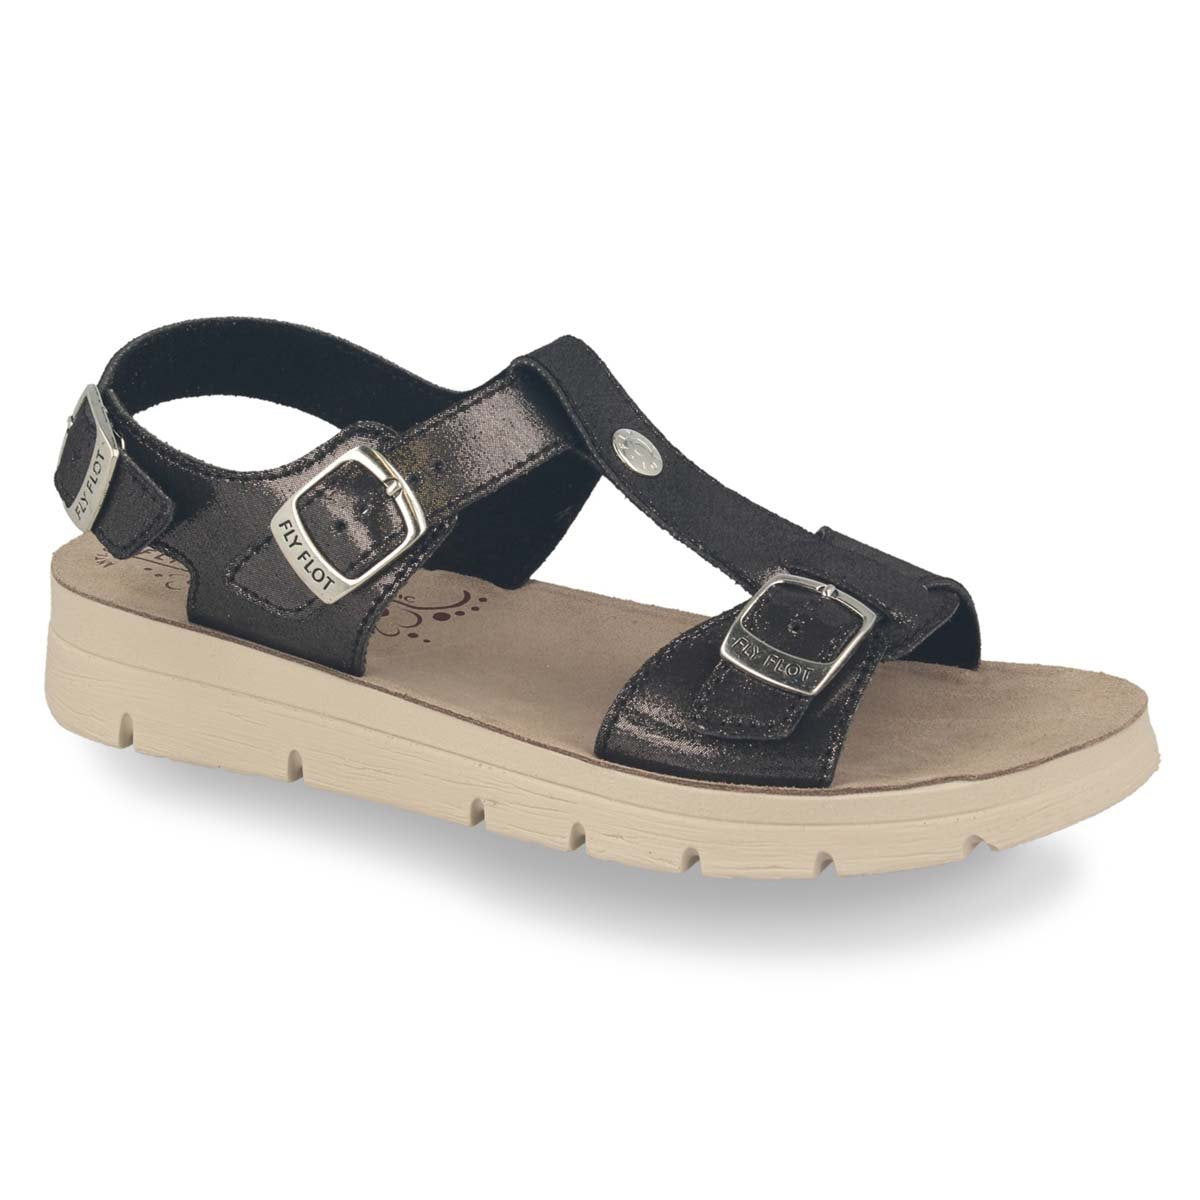 See the Soft Microfiber Back Strap Women Sandals With Anti-Shock Cushioned Leather Insole in the colour BLACK, available in various sizes